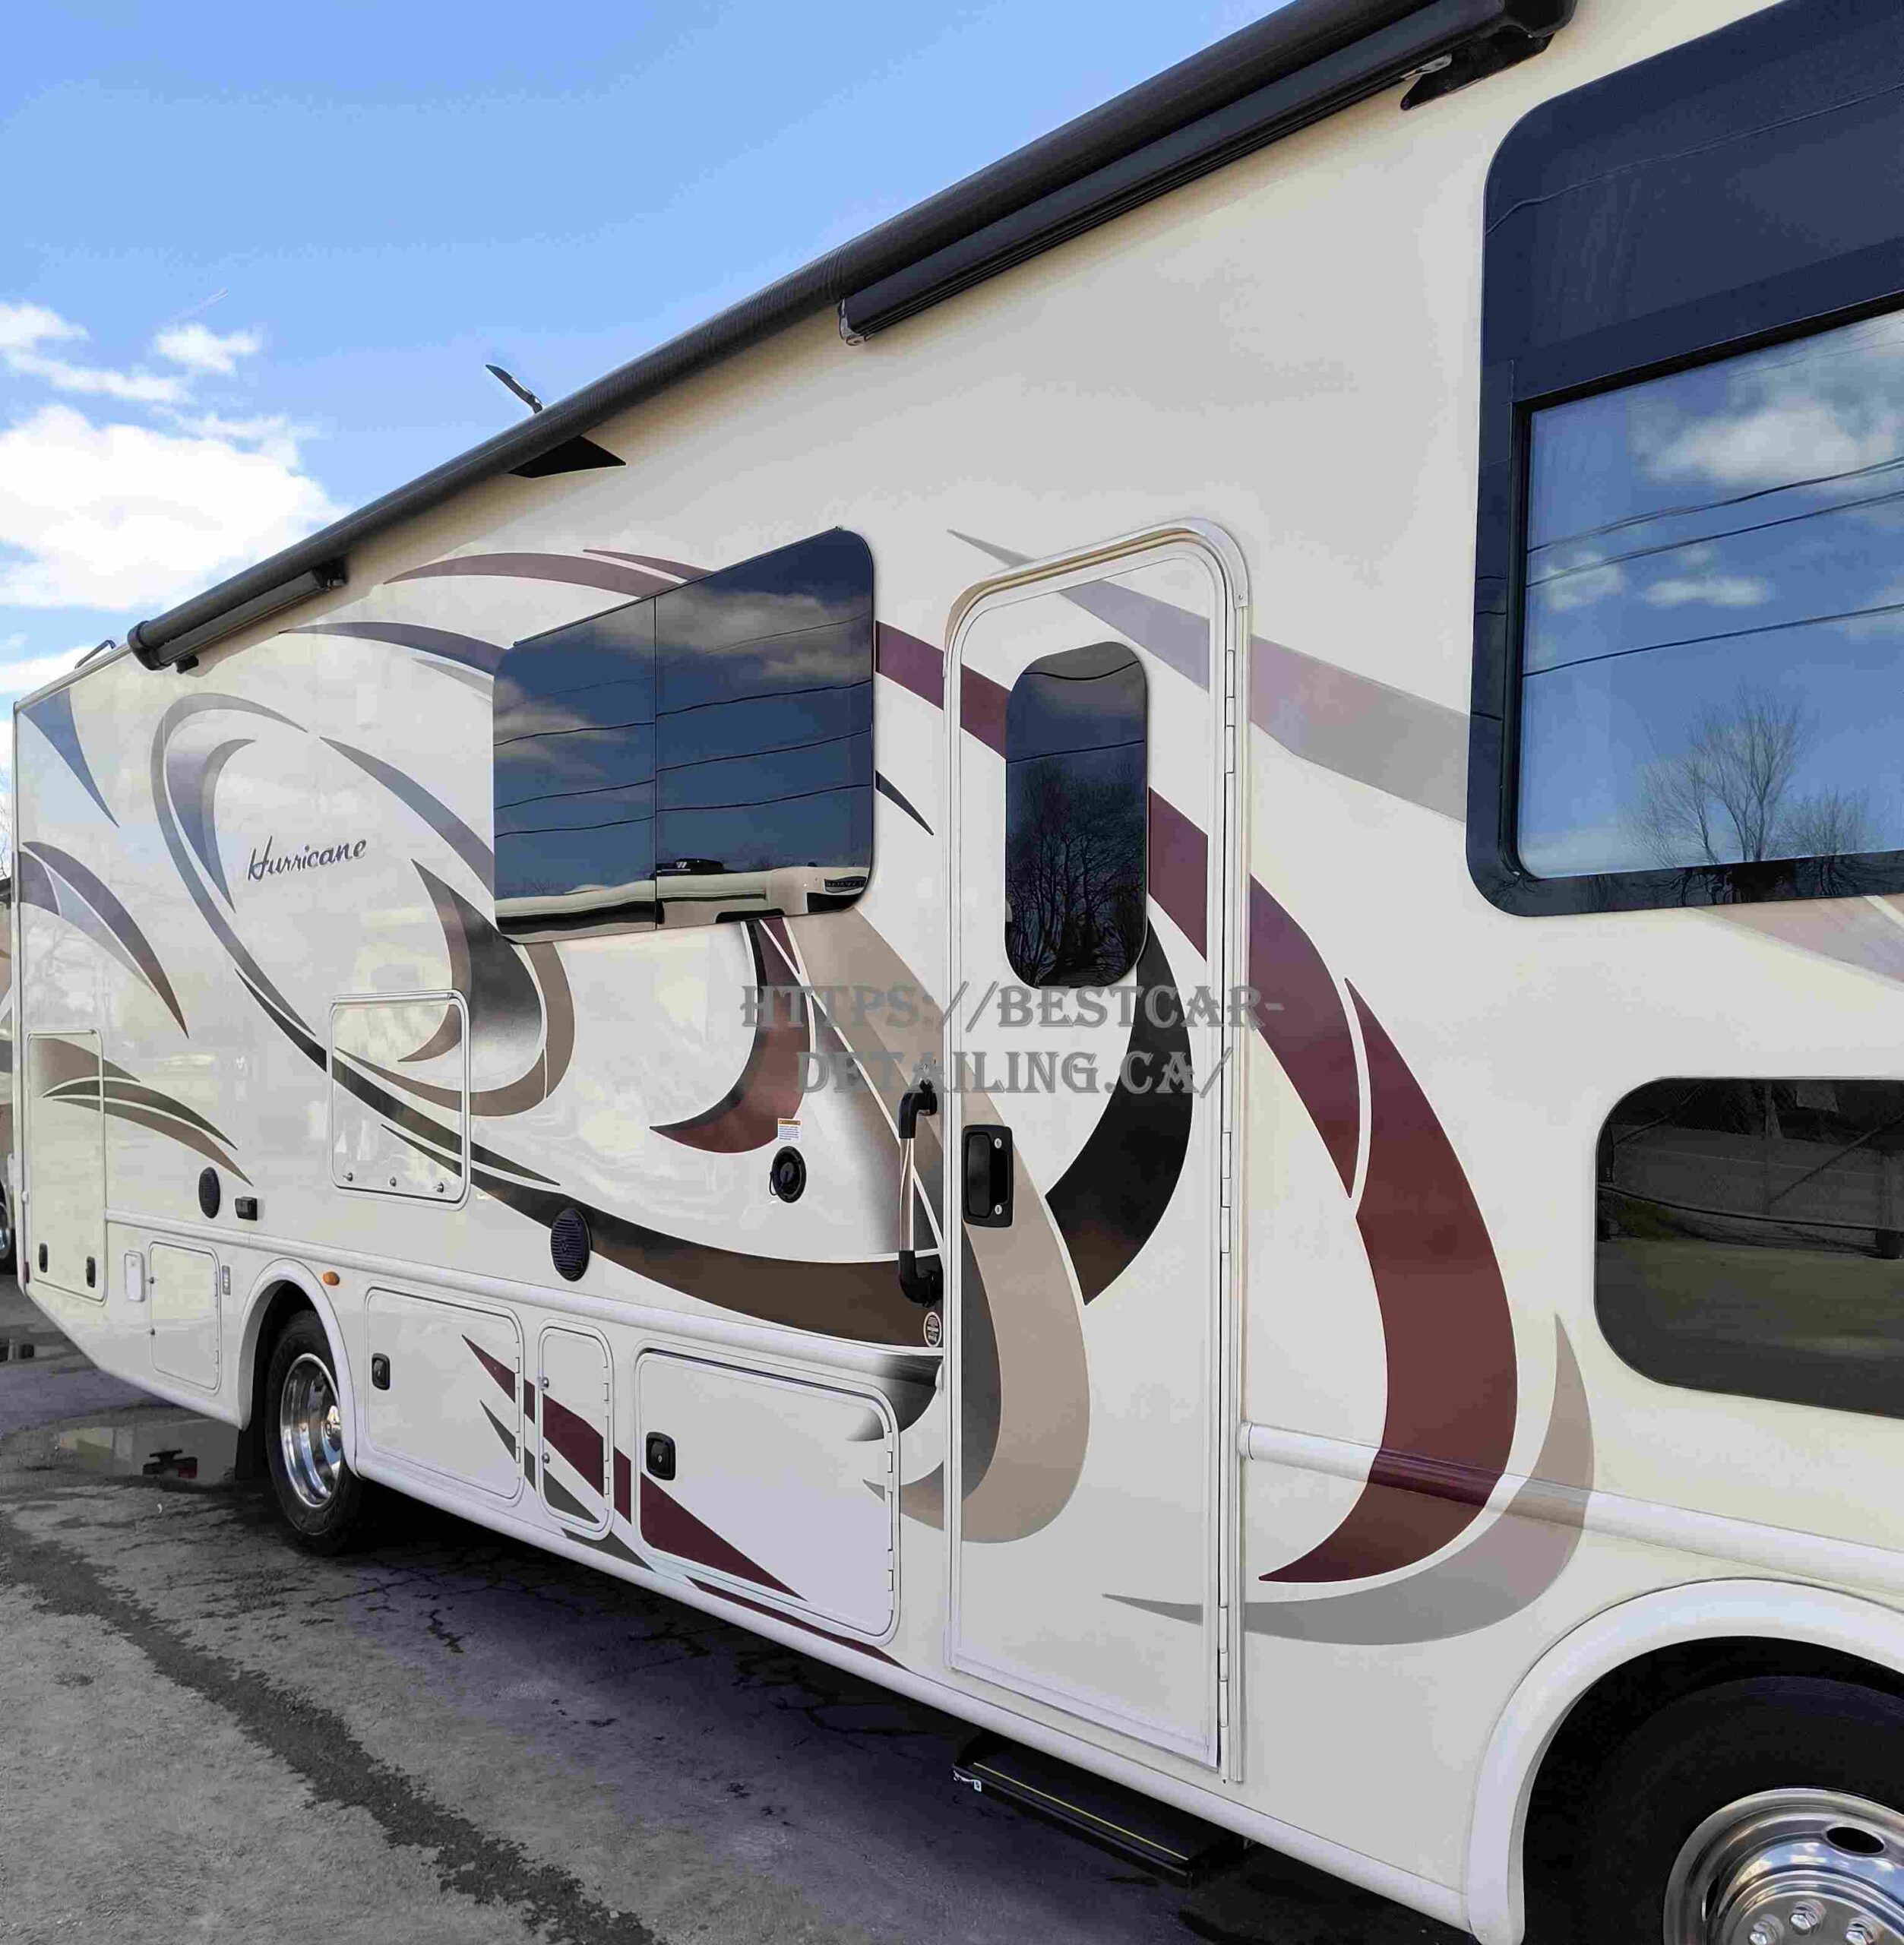 Motor Home Cleaning Motor Home Detailing RV Cleaning RV Detailing RV Wash Travel Trailers Cleaning Travel Trailers Detailing Motorhome Exterior Wash RV exterior Detailing Highway Truck Wash